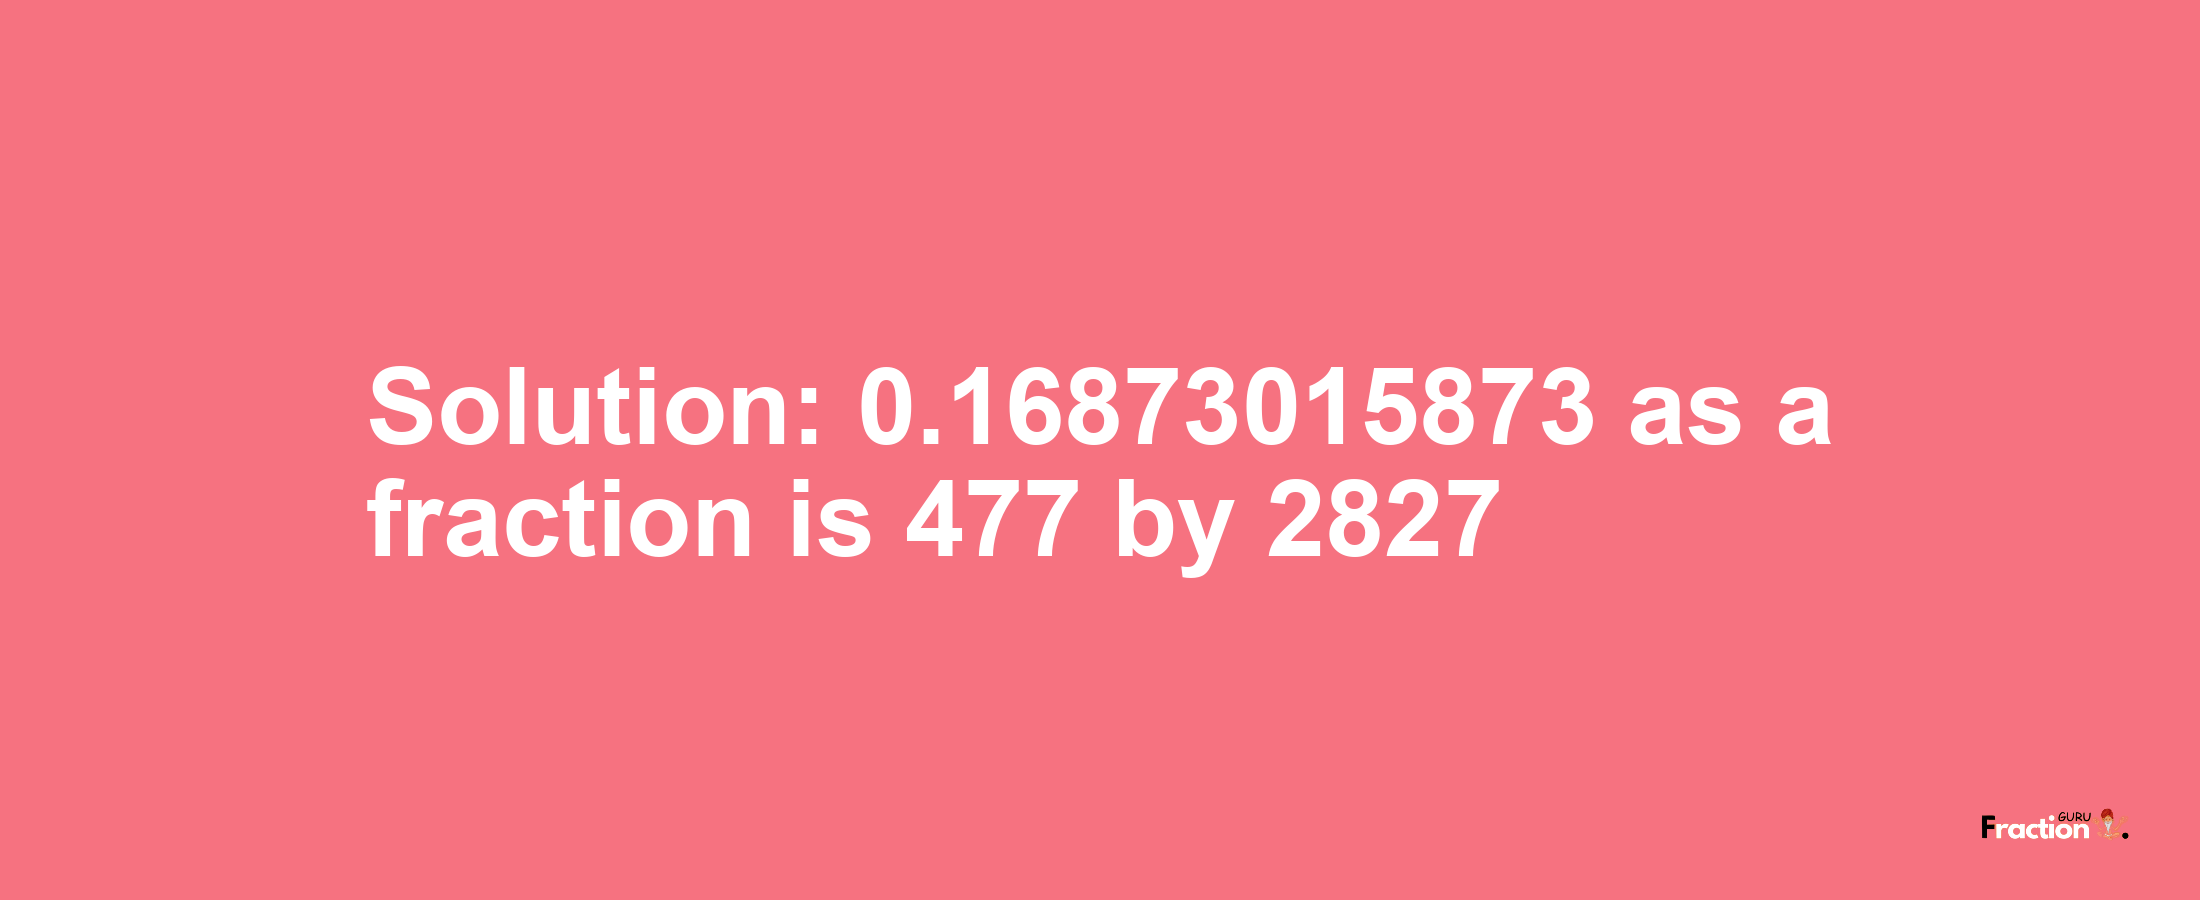 Solution:0.16873015873 as a fraction is 477/2827